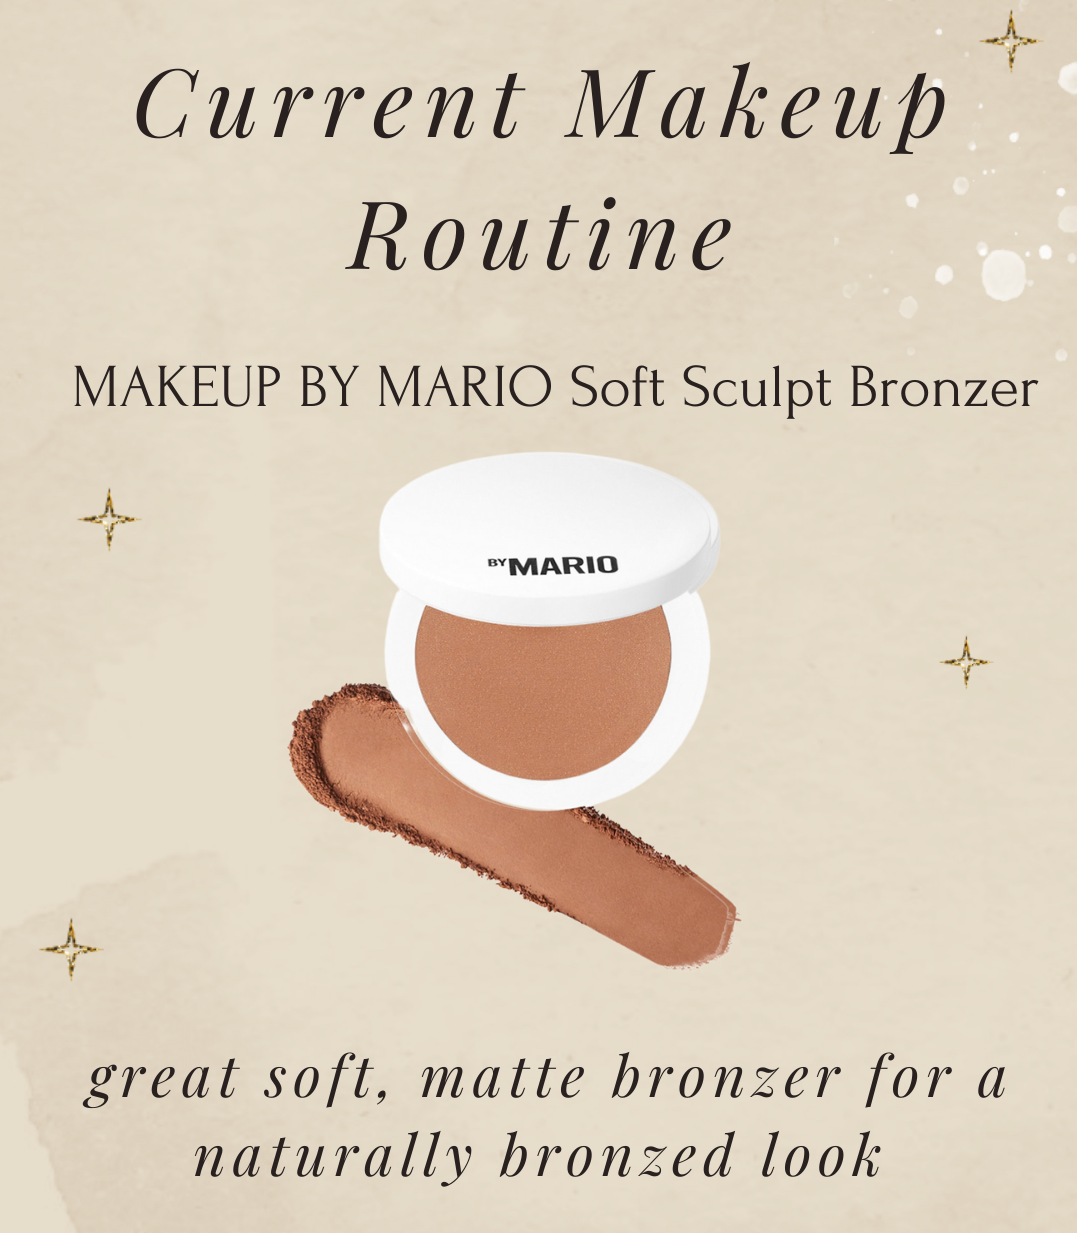 MAKEUP BY MARIO Soft Sculpt Bronzer | Affordable by Amanda